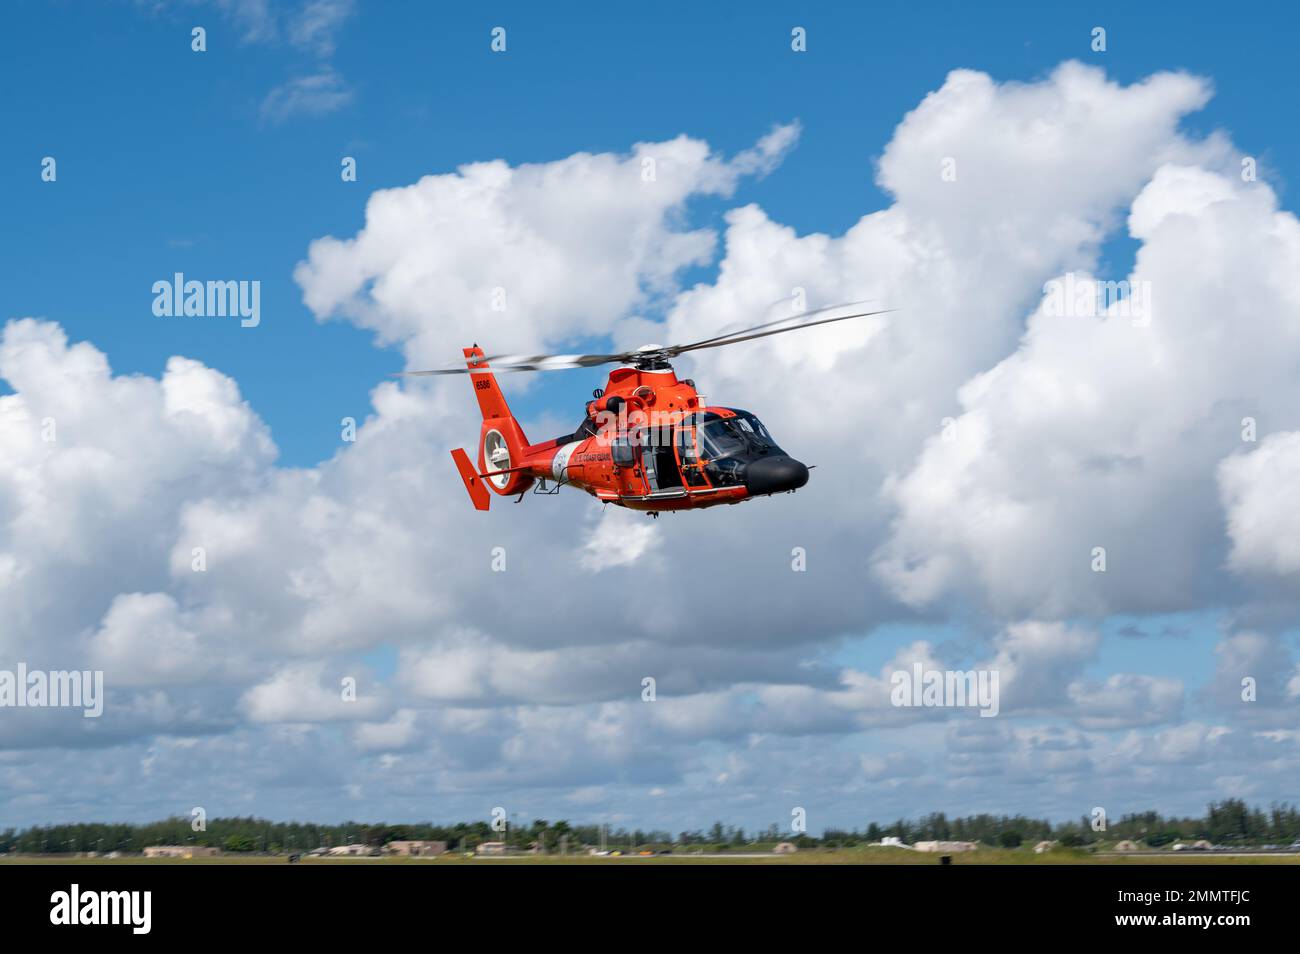 United States Coast Guard MH-65 Dolphin helicopter from Coast Guard Air Station Miami, training at Homestead ARB. Stock Photo